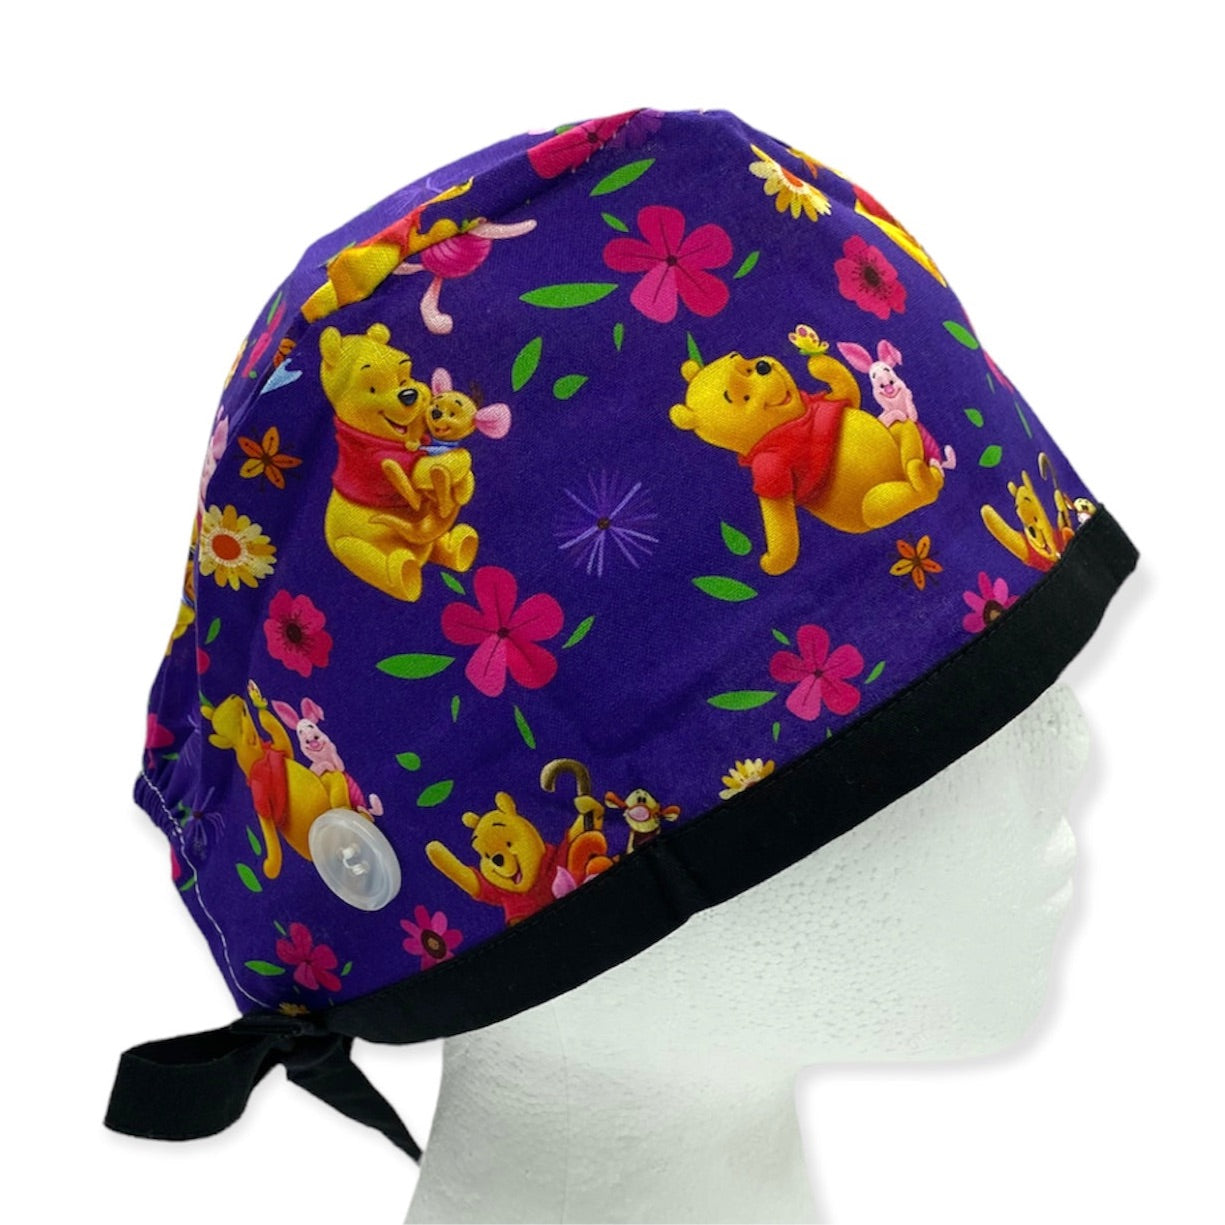 Winnie the pooh disney surgical scrub hat. Best scrub cap for men and women with buttons and satin lining